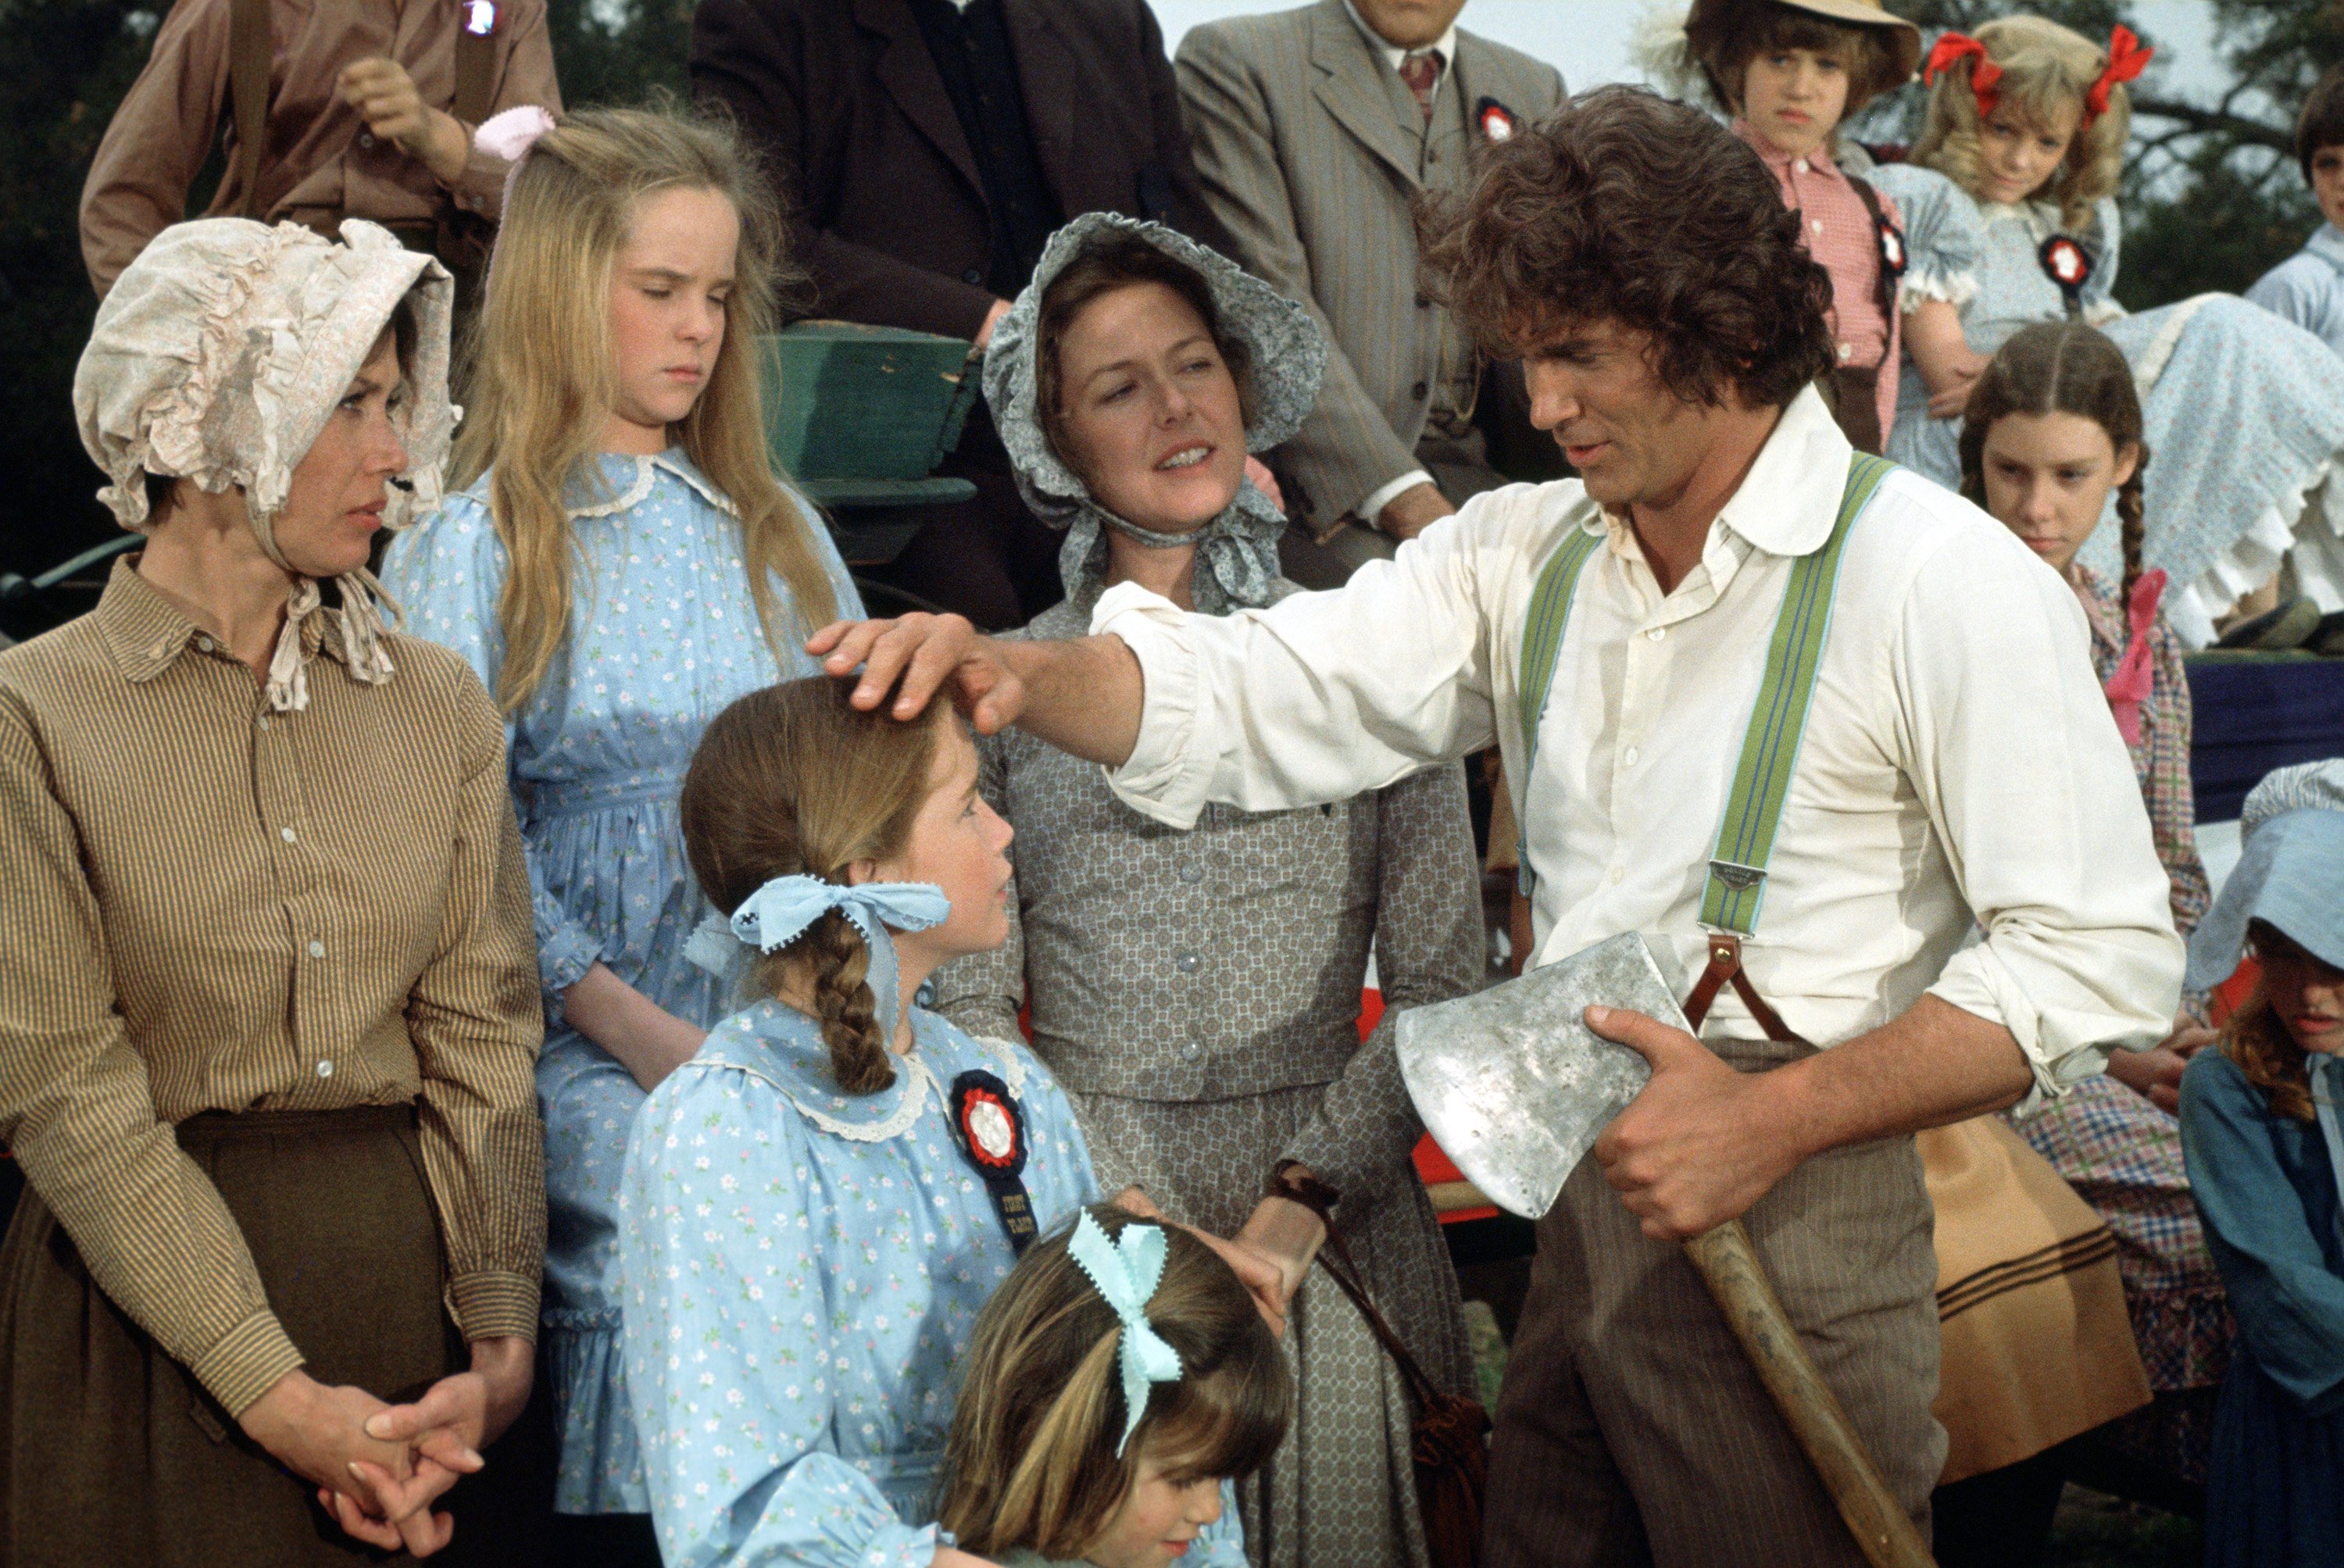 "Founder's Day" Episode 24 -- Aired 05/04/1975 -- Pictured: (l-r) Melissa Sue Anderson as Mary Ingalls, Melissa Gilbert as Laura Ingalls, Karen Grassle as Caroline Ingalls, Michael Landon as Charles Ingalls. Landon puts his hand on Gilbert's head/